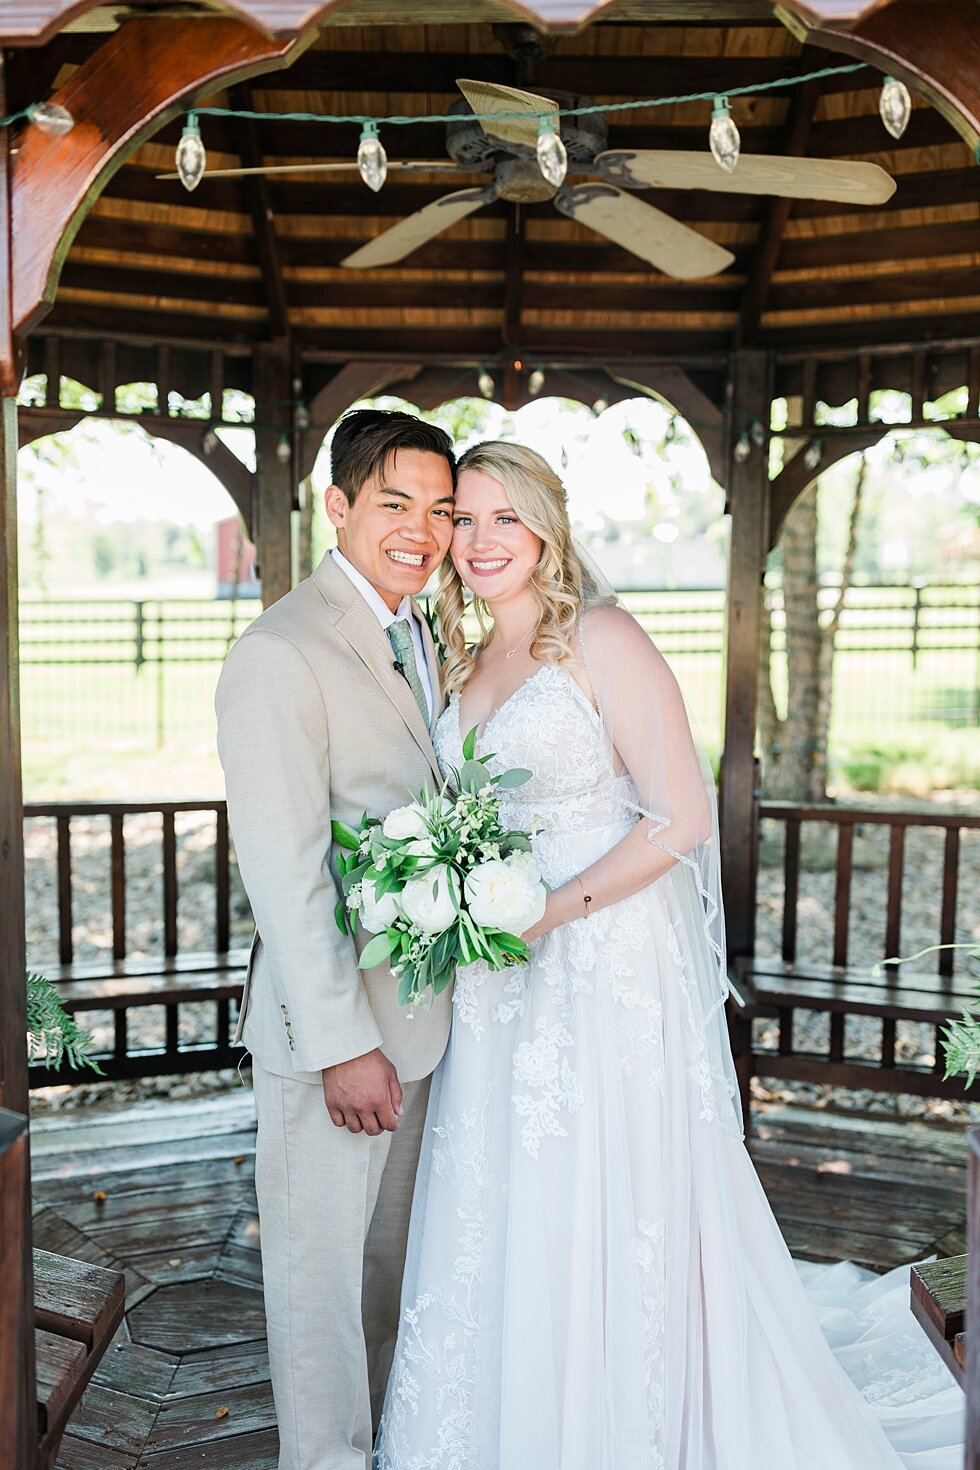  And just like that they are married! Romantic casual lace wedding gown close friends neutral colors background wedding natural greenery crisp white #midwestphotographer #kywedding #louisville #kentuckywedding #louisvillekyweddingphotographer #weddin